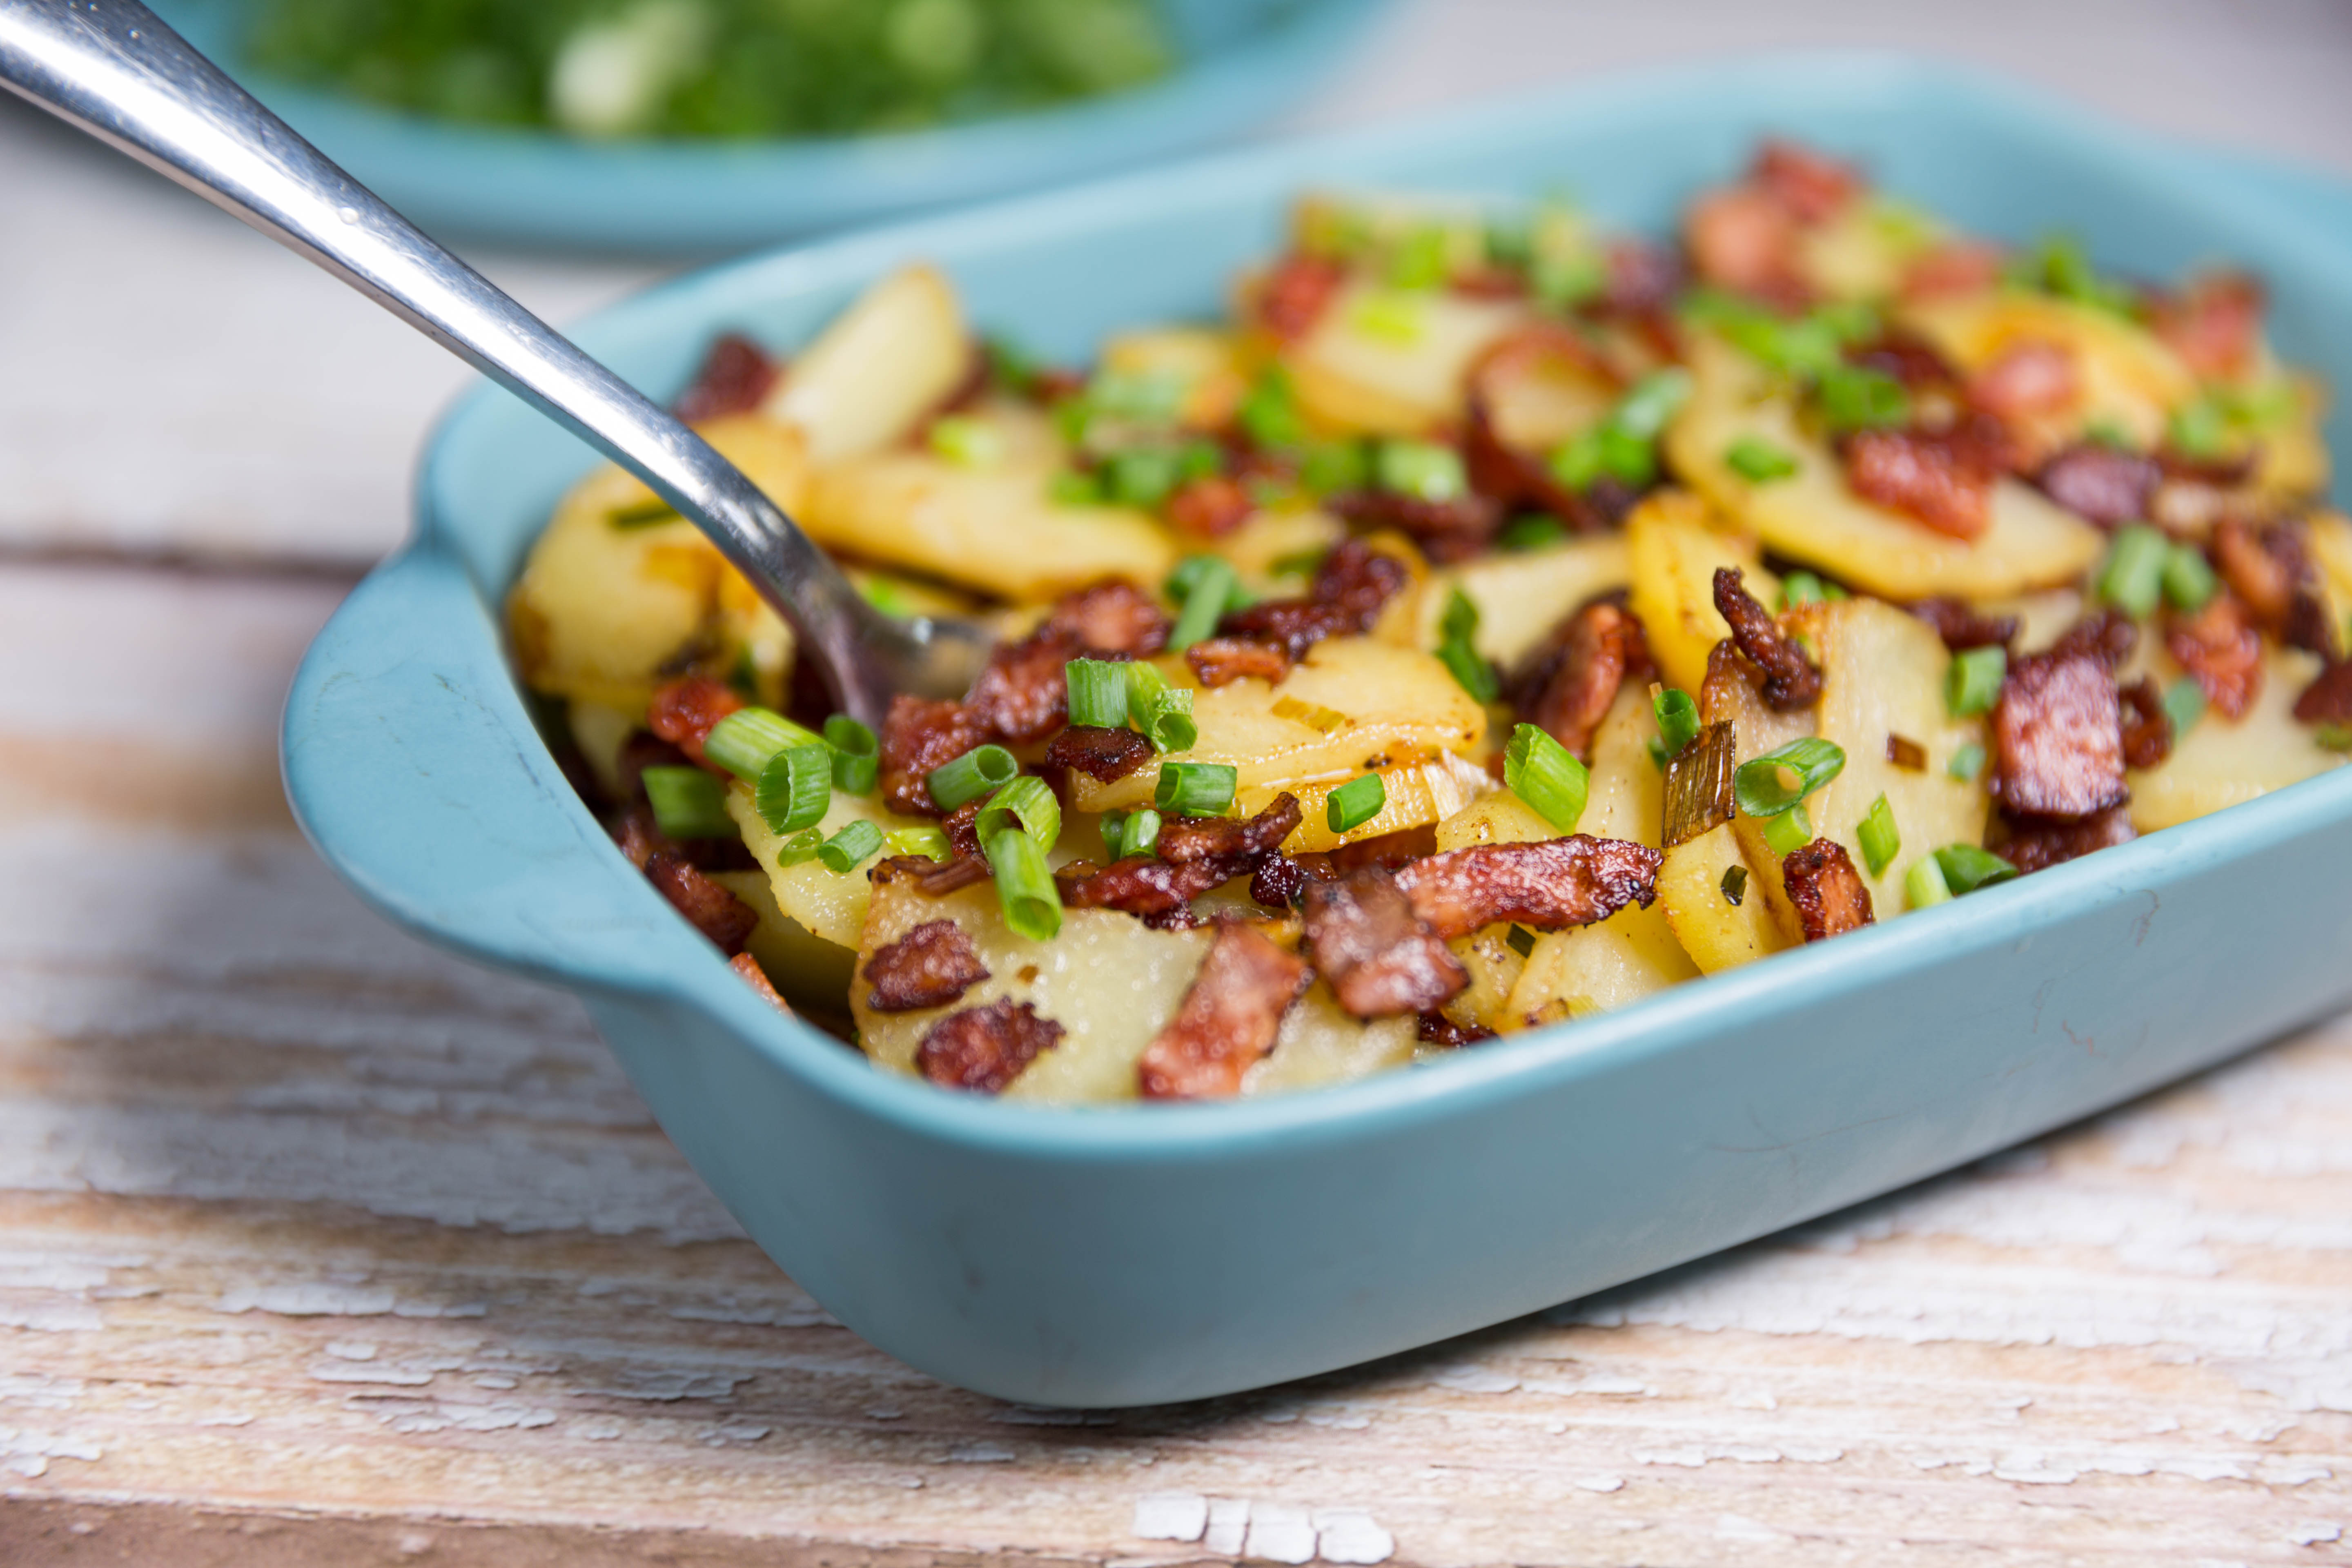 FRIED POTATOES WITH BACON RECIPES